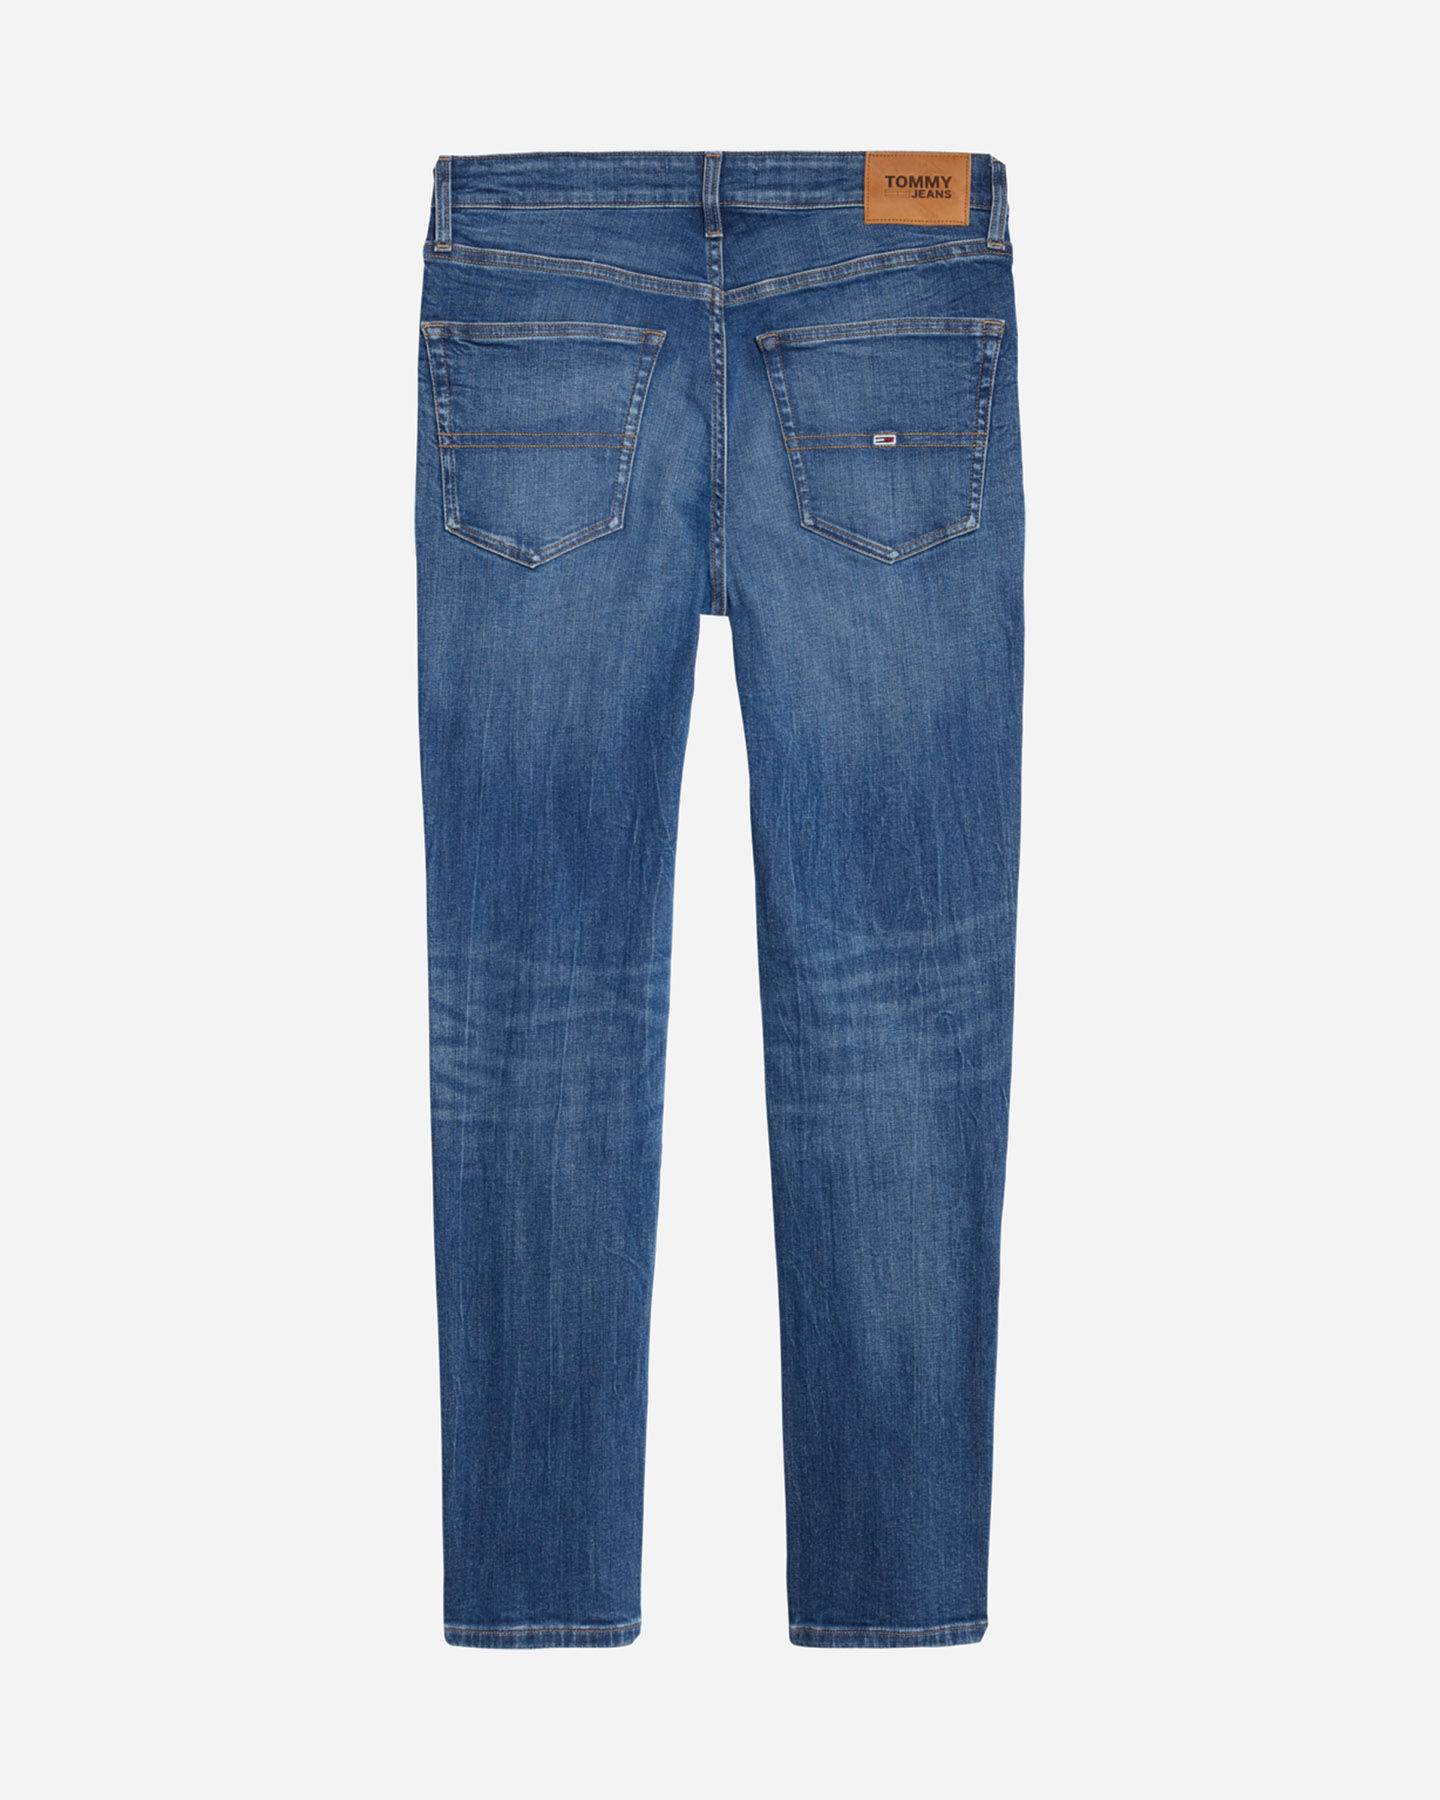  Jeans TOMMY HILFIGER SCANTON SLIM MID M S4096175|1A5|29 scatto 1